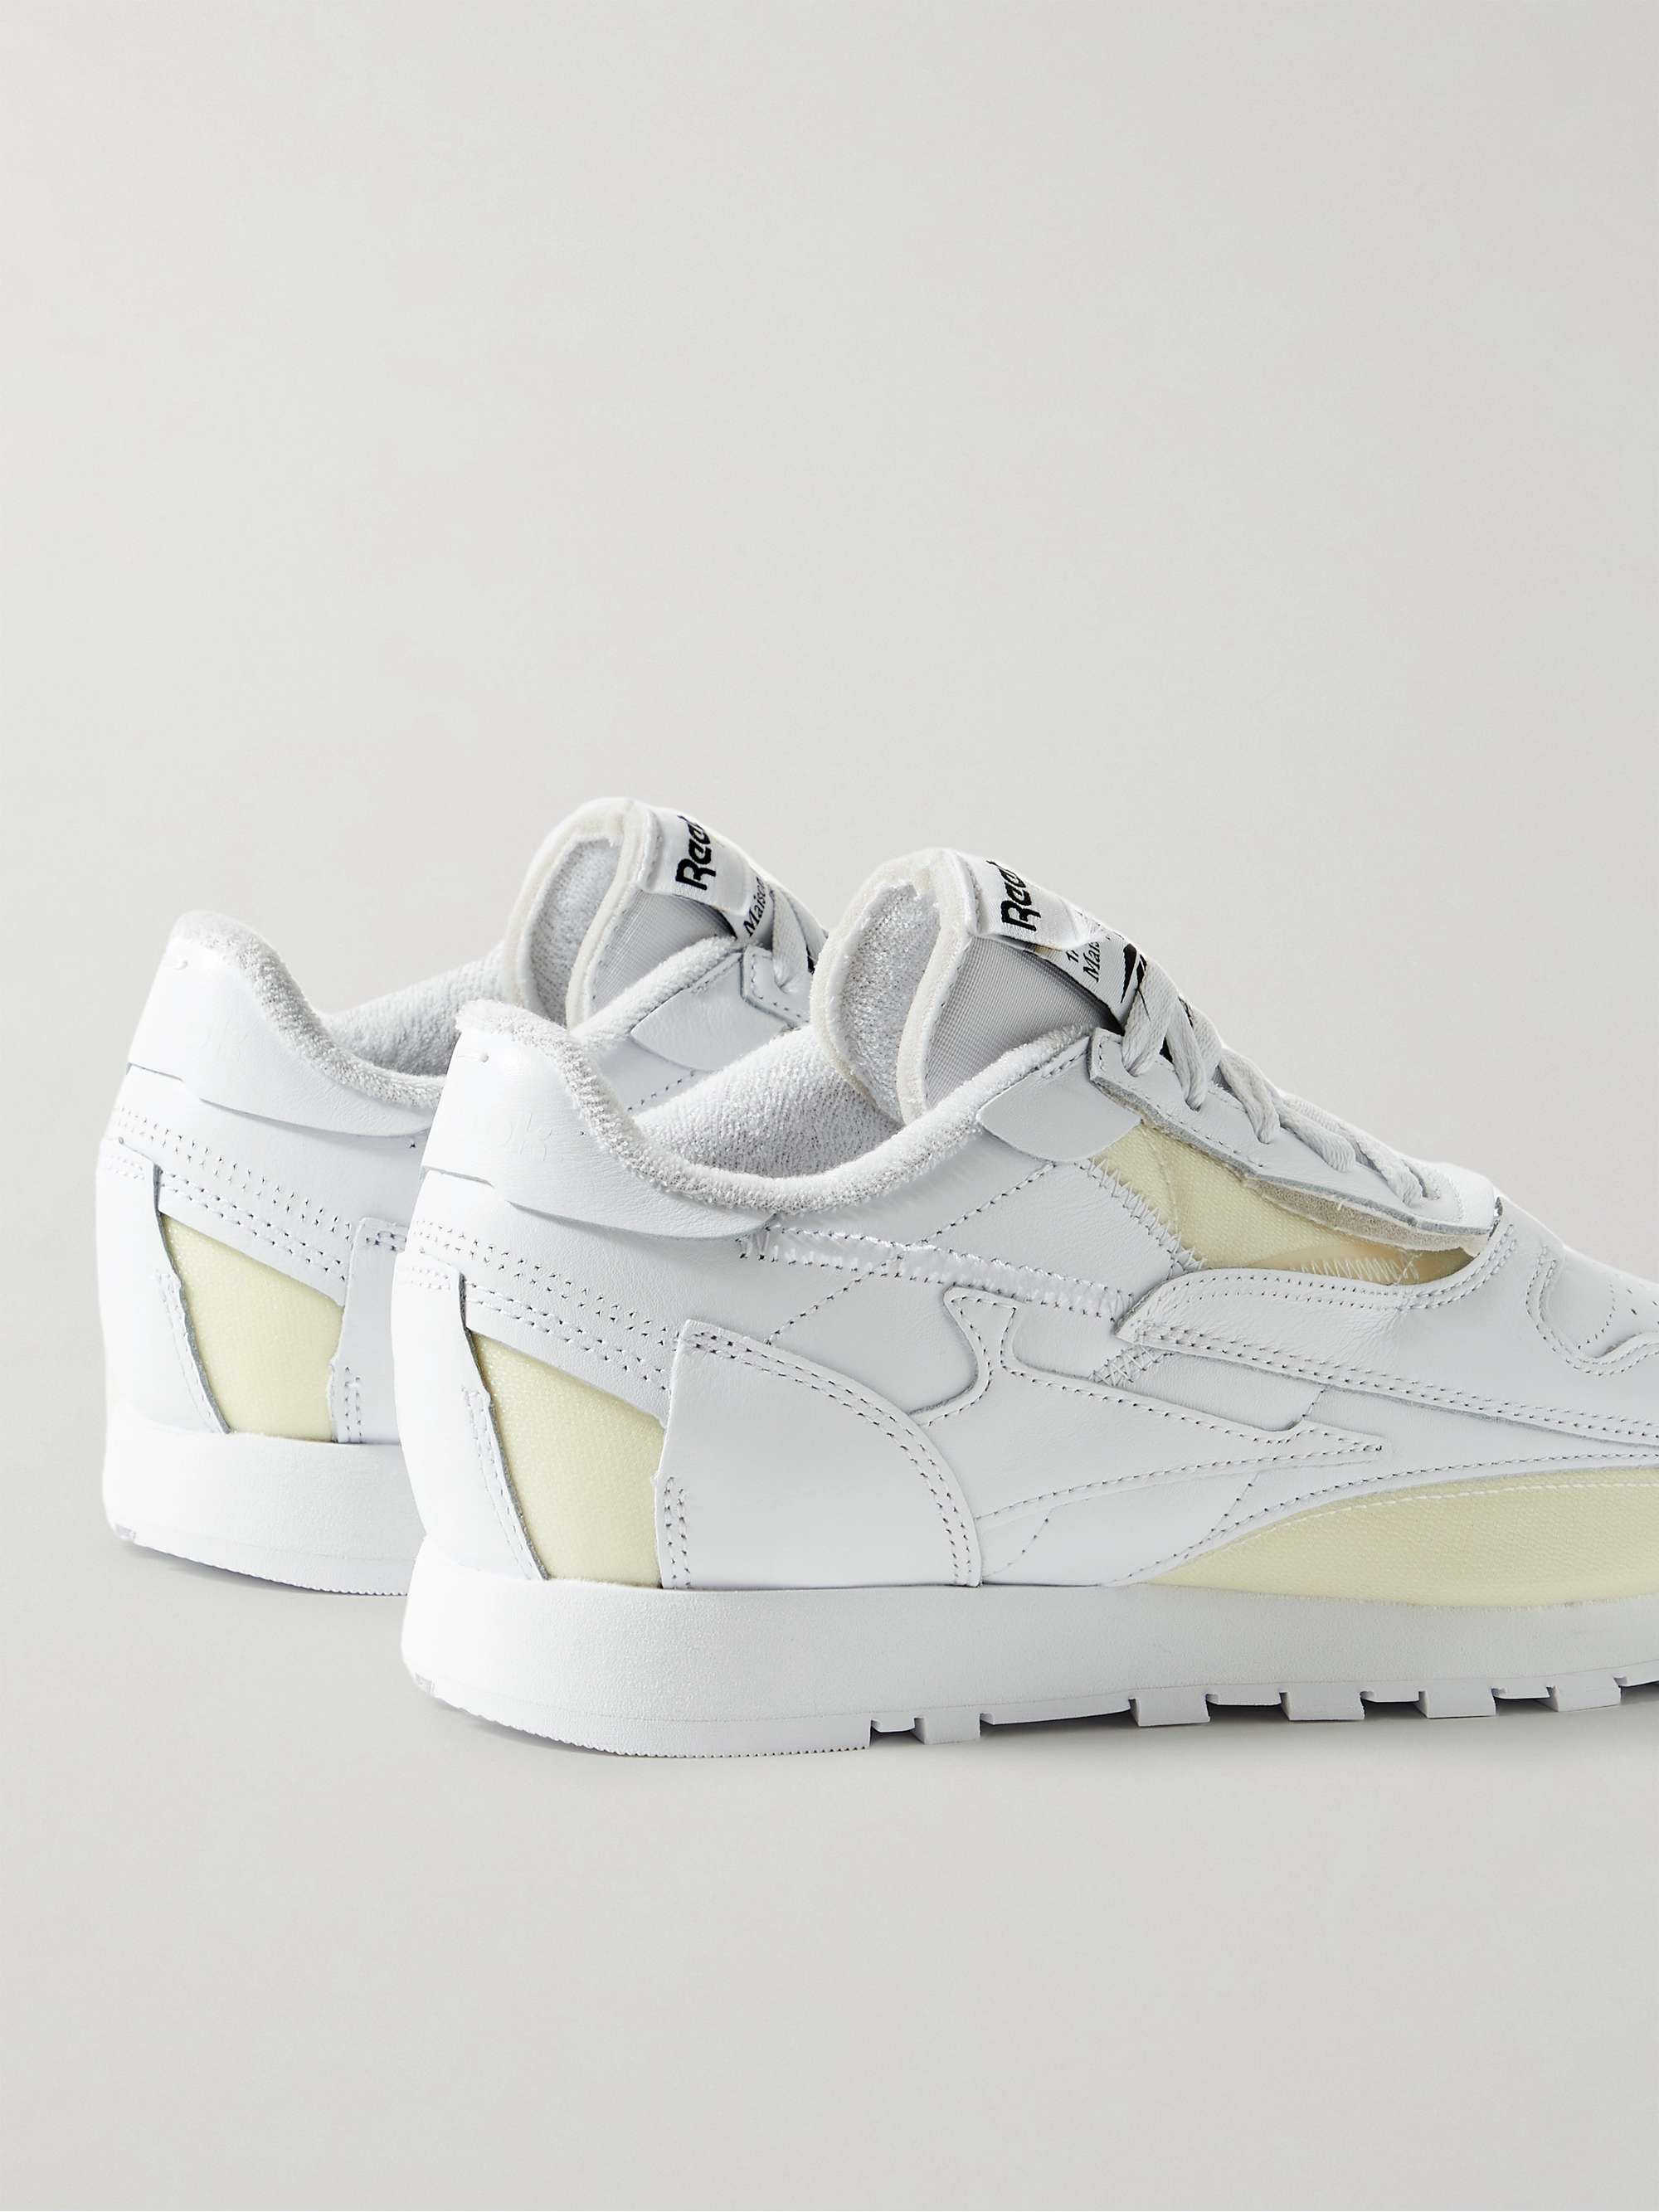 MAISON MARGIELA + Reebok Leather and Coated-Mesh Sneakers | MR PORTER